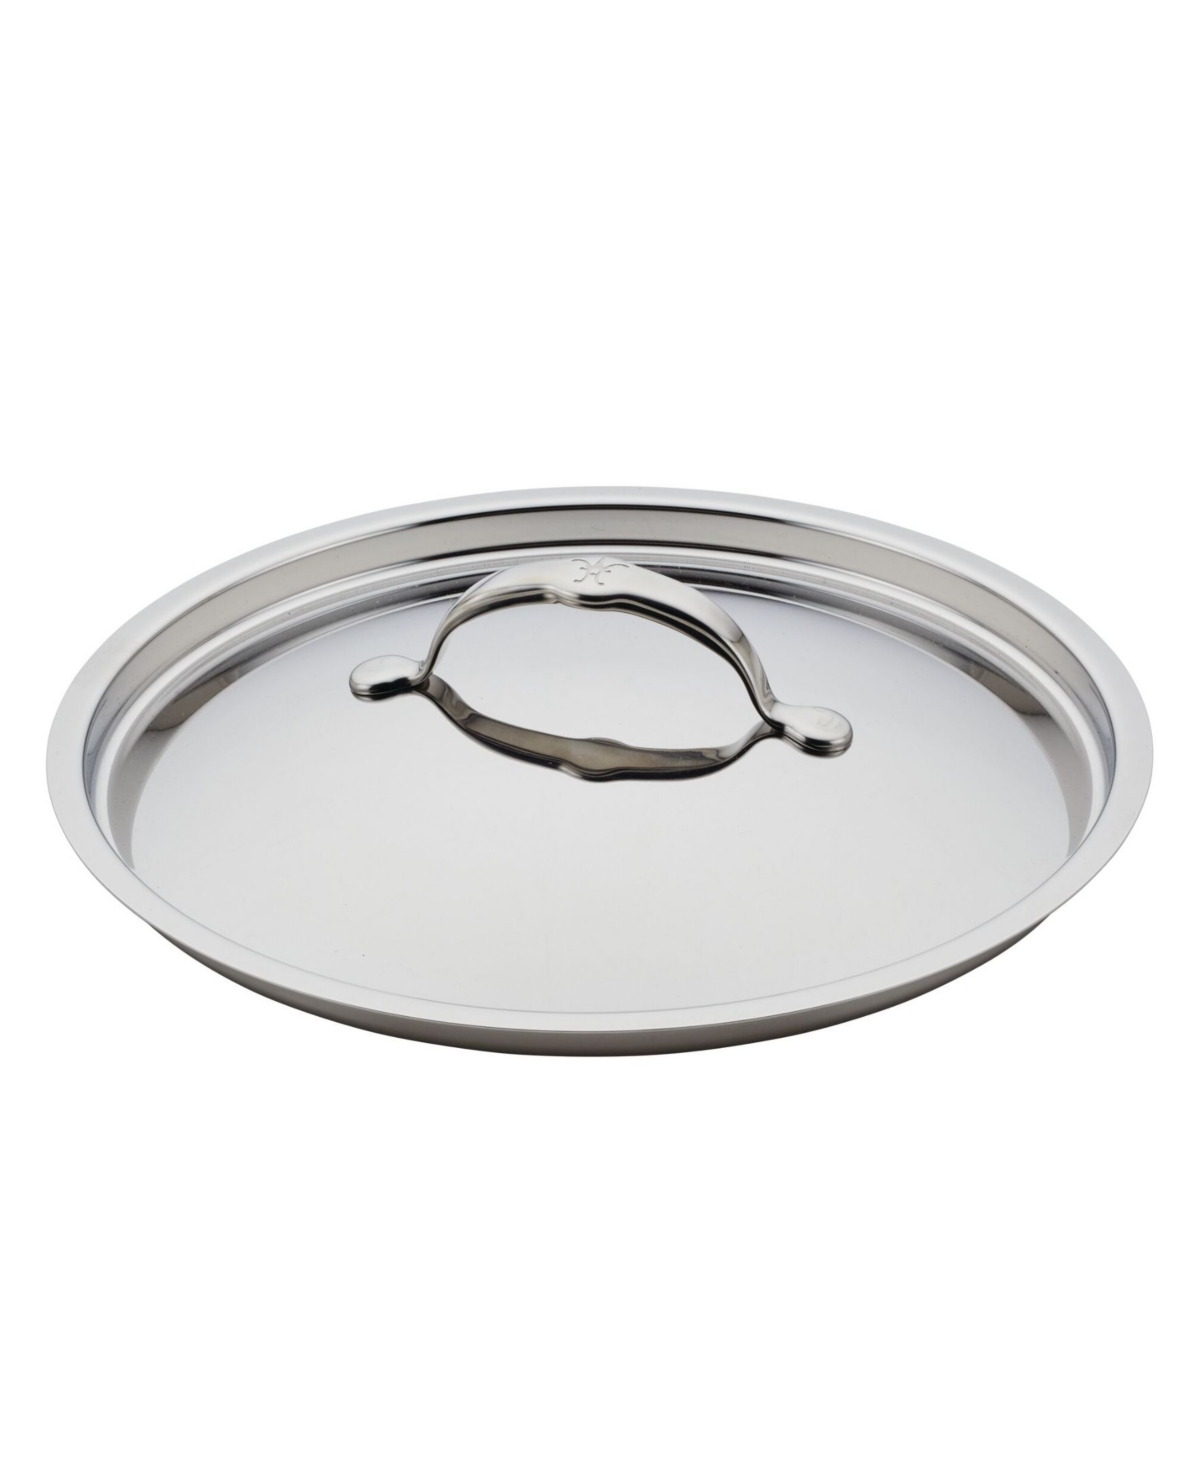 Shop Hestan Provisions Stainless Steel 11" Lid